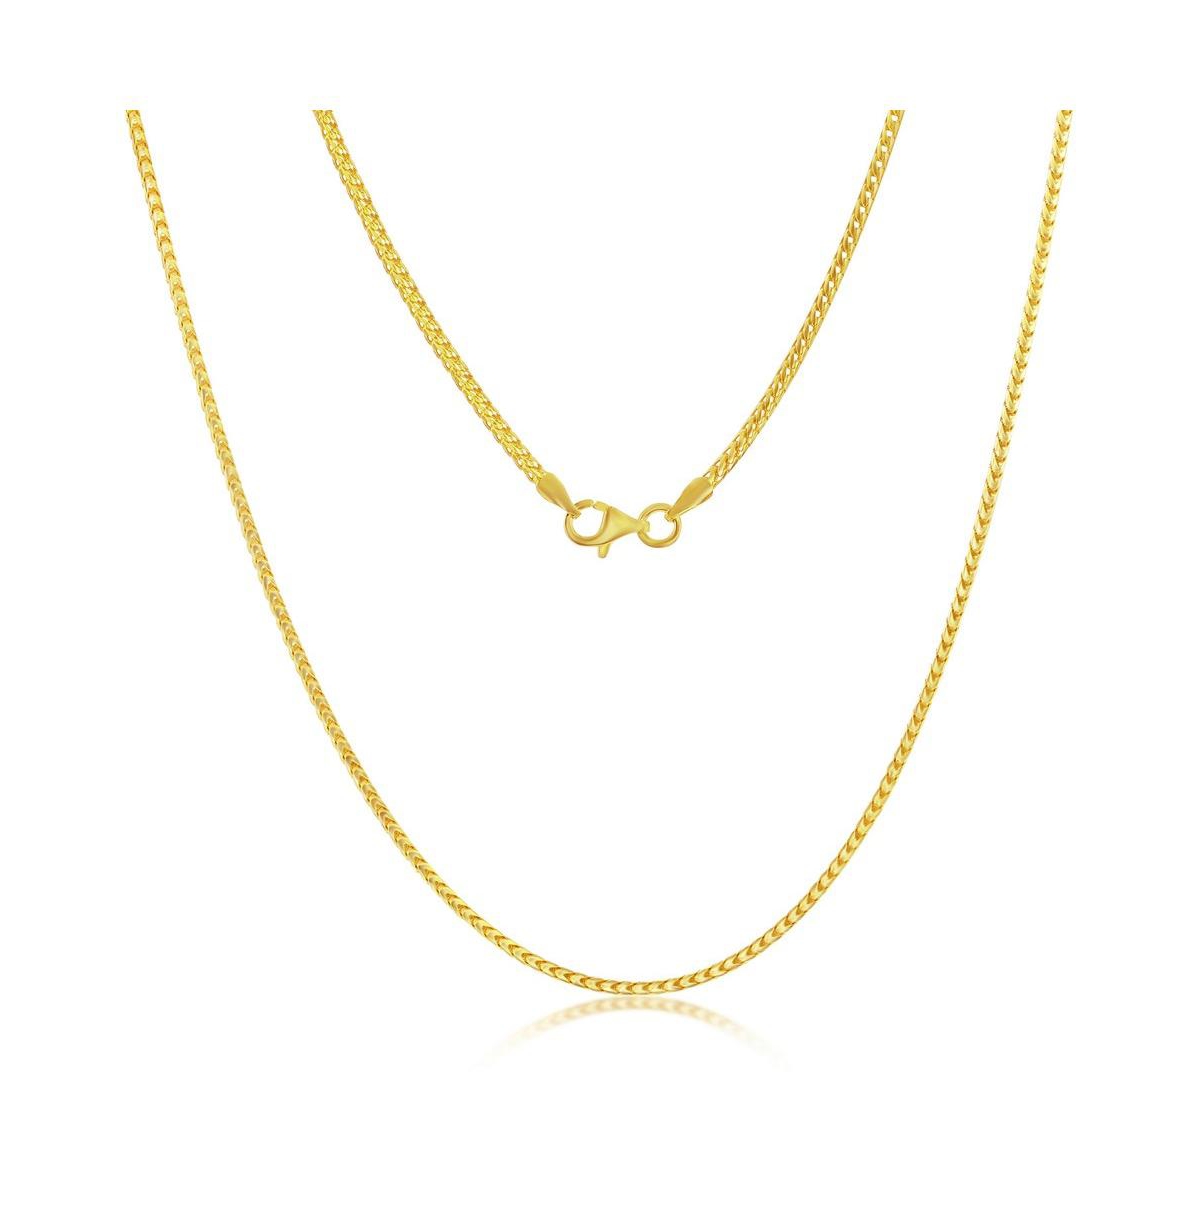 Franco Chain 1.5mm Sterling Silver or Gold Plated Over Sterling Silver 20" Necklace - Silver